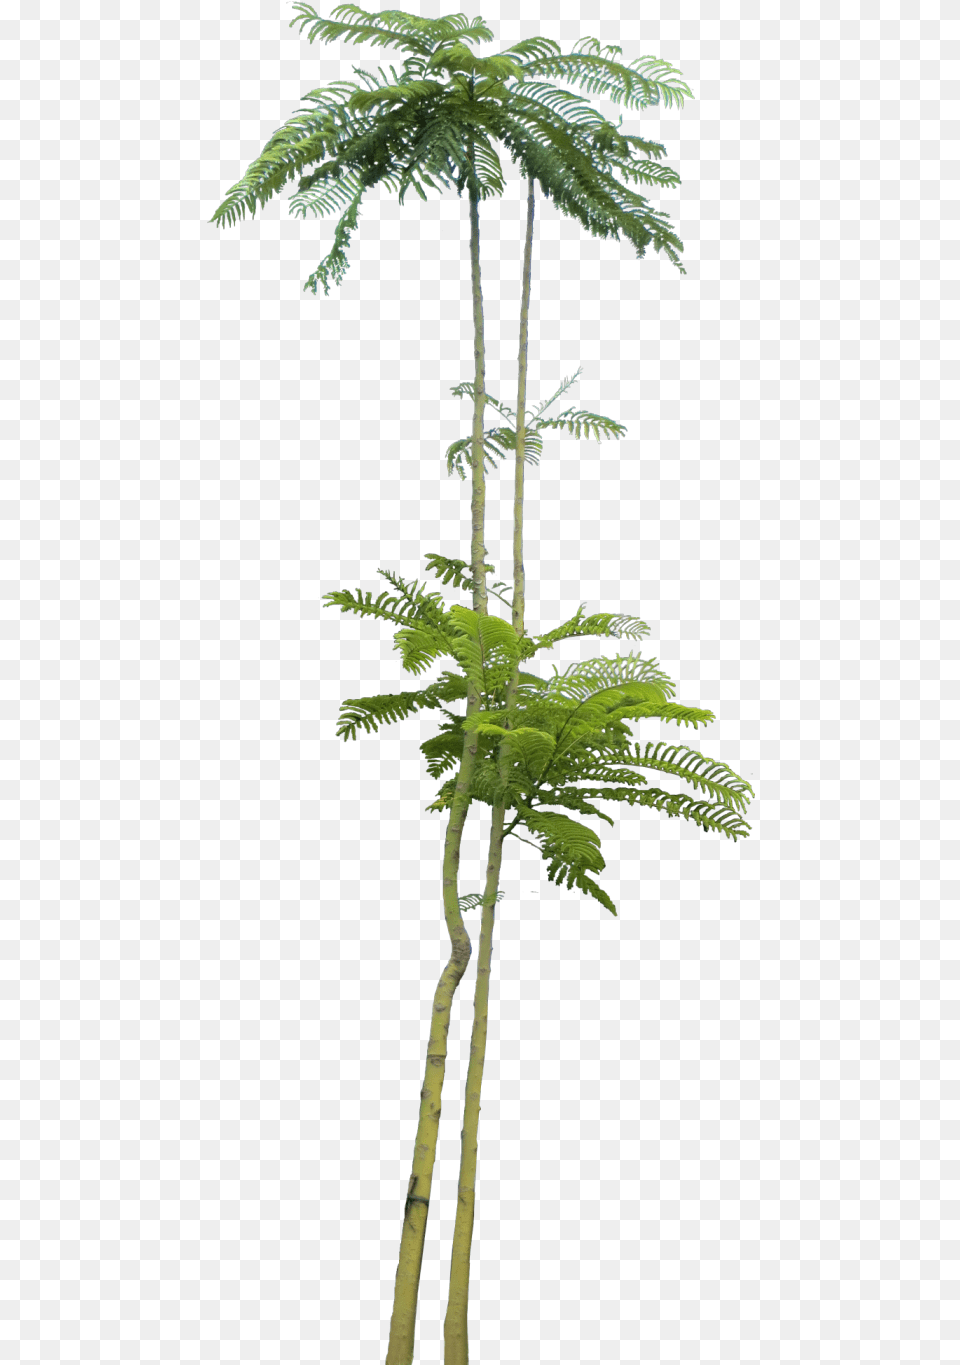 A Collection Of Tropical And Subtropical Plant Images Free Tree Photoshop Plant, Green, Palm Tree, Leaf, Fern Png Image